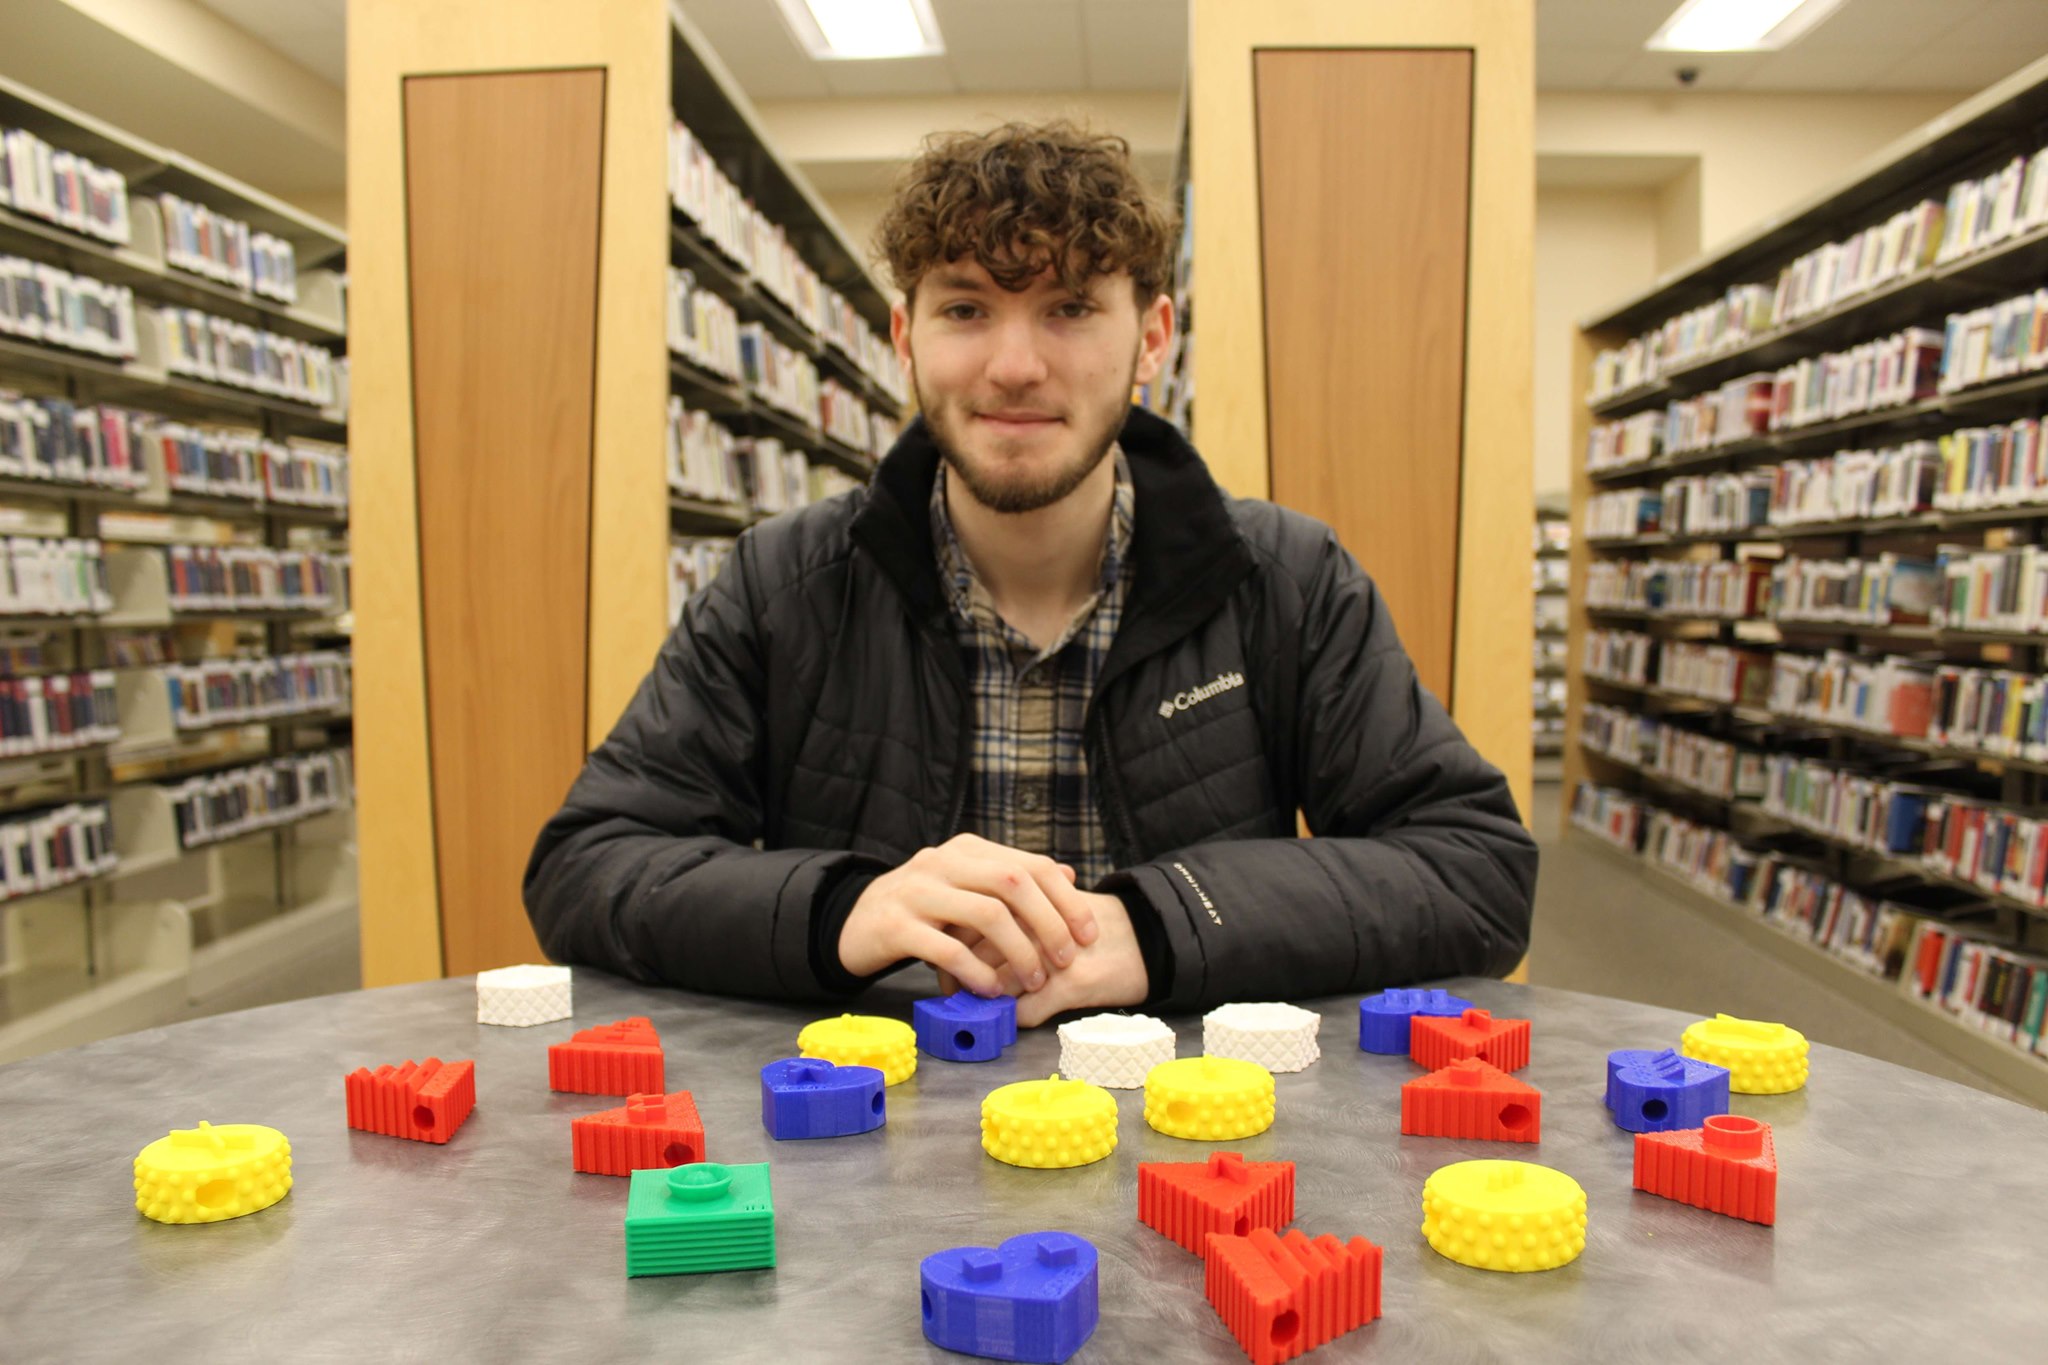 Young man with brown hair and beard wearing a black coat and brown flannel shirt seated at a library table in front of books. Multi-colored 3D printed objects are on the table.